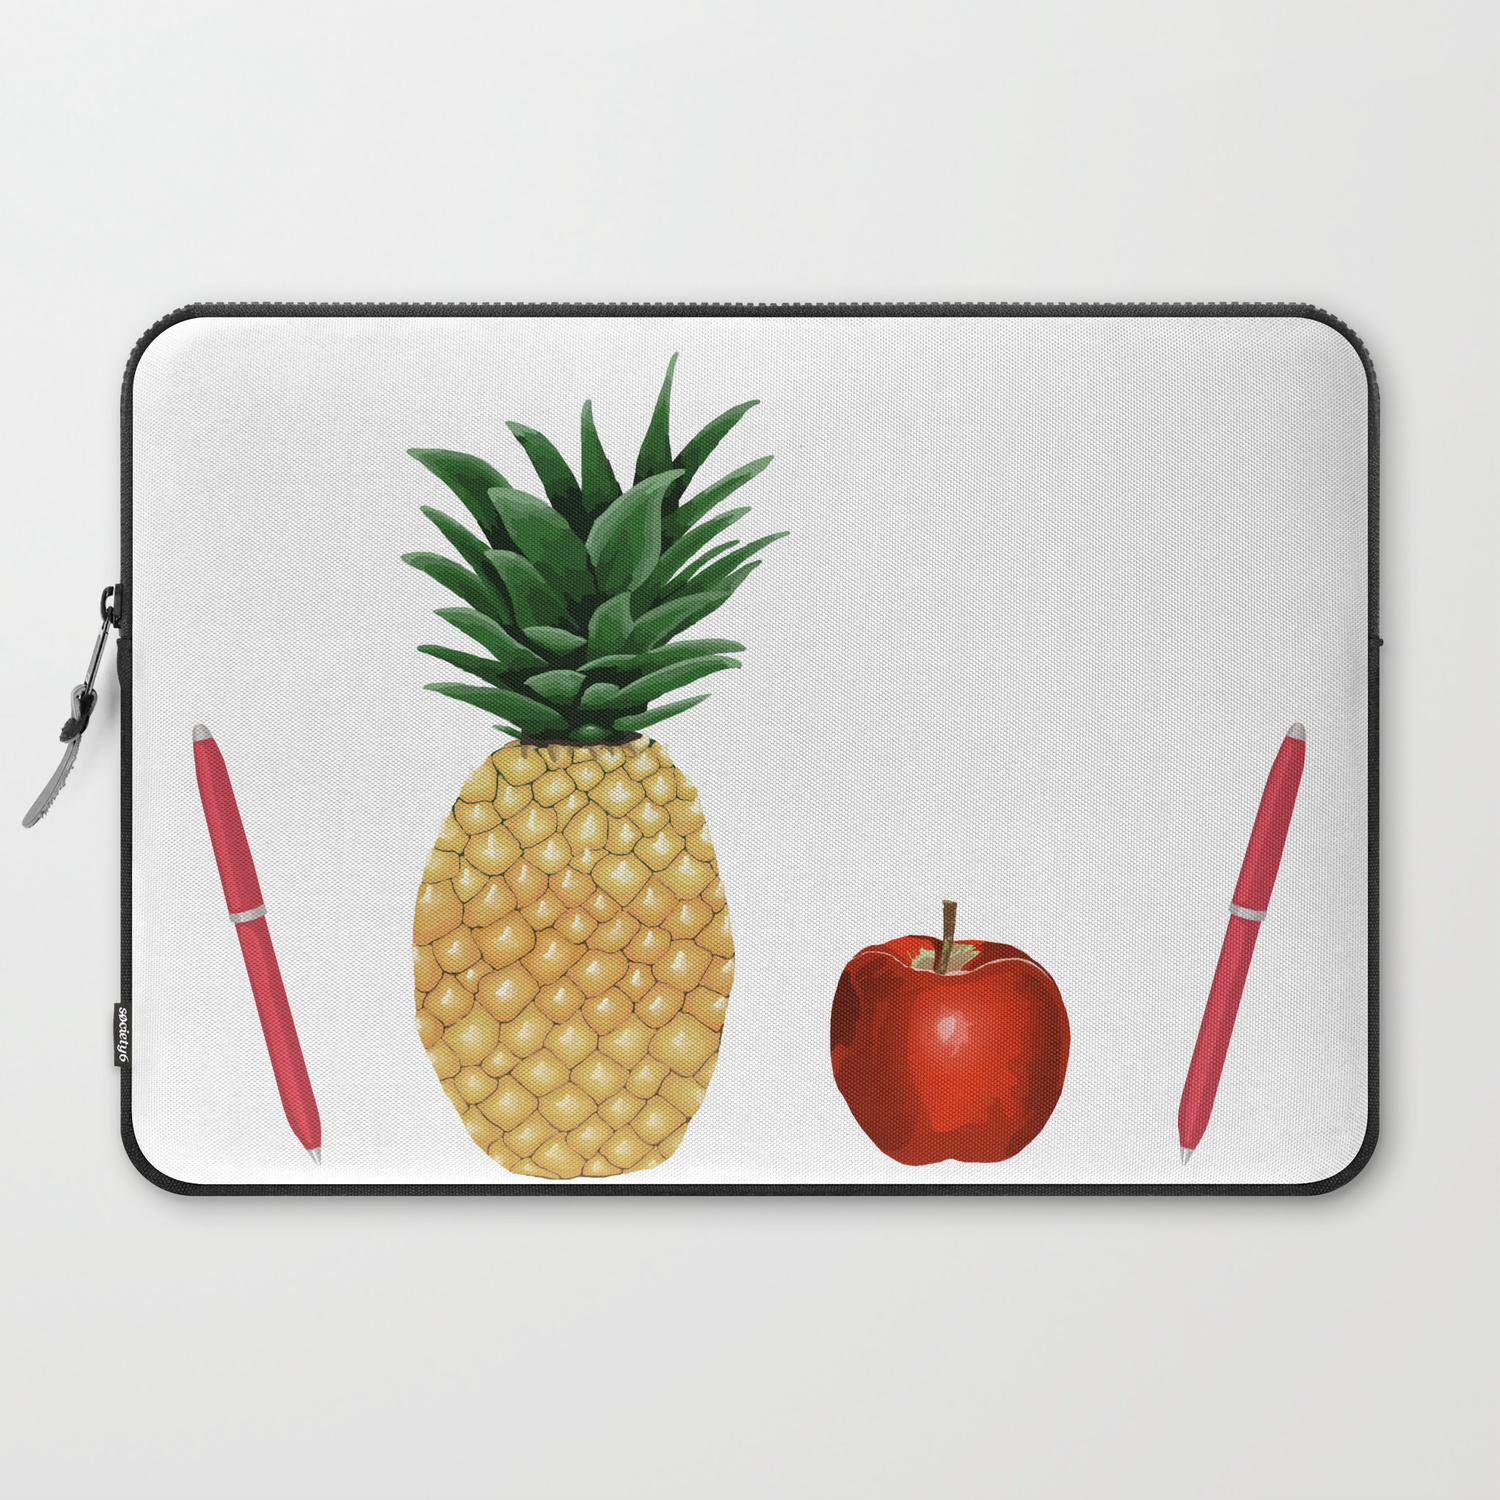 Pen Pineapple Apple Pen - PPAP - Homage - Funny - 57 Montgomery Ave Laptop  Sleeve by 57 Montgomery Ave | Society6